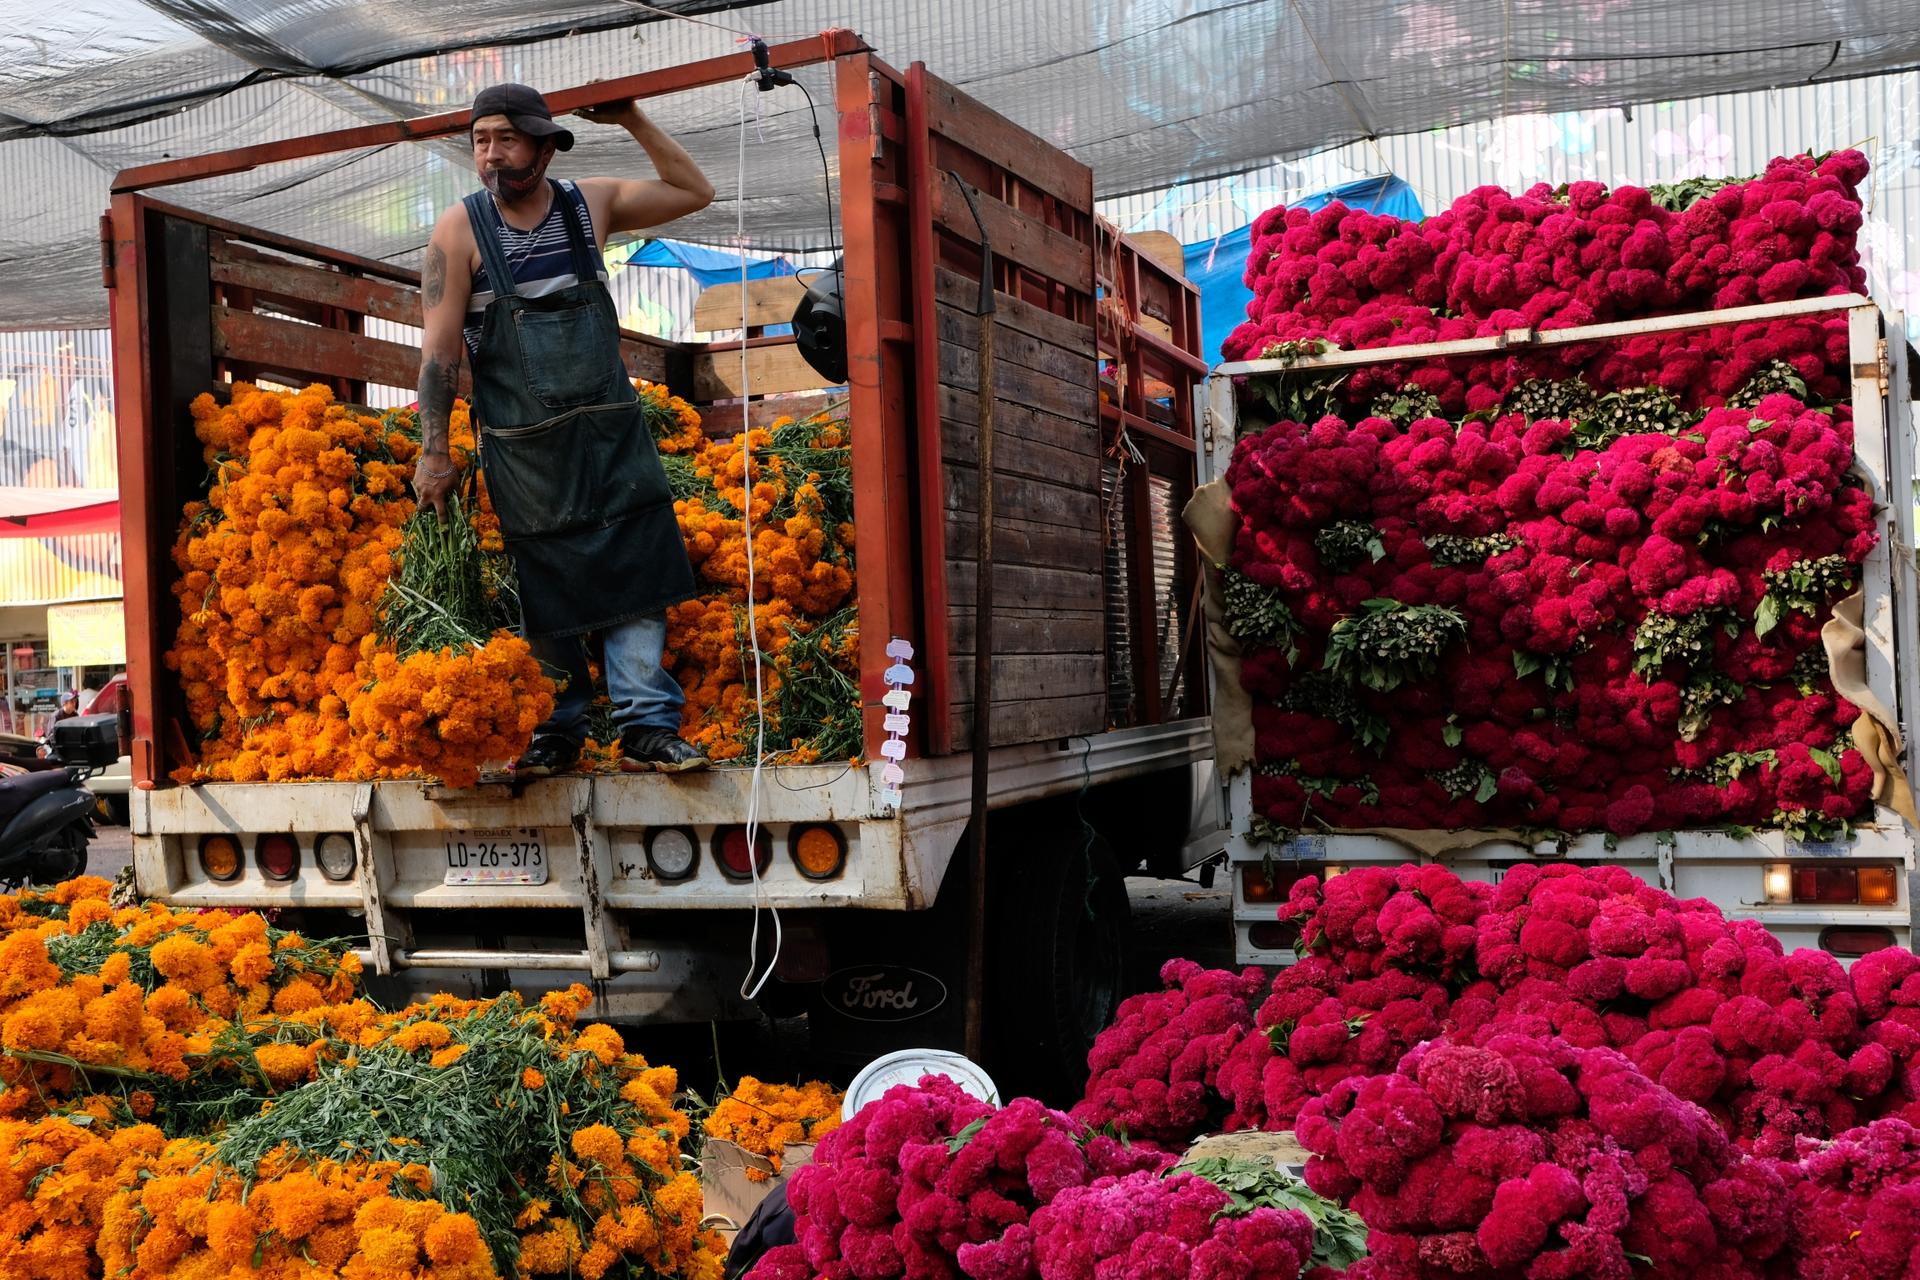 A man stands inside a truck bursting with gold and pink flowers all around him in a market in Mexico